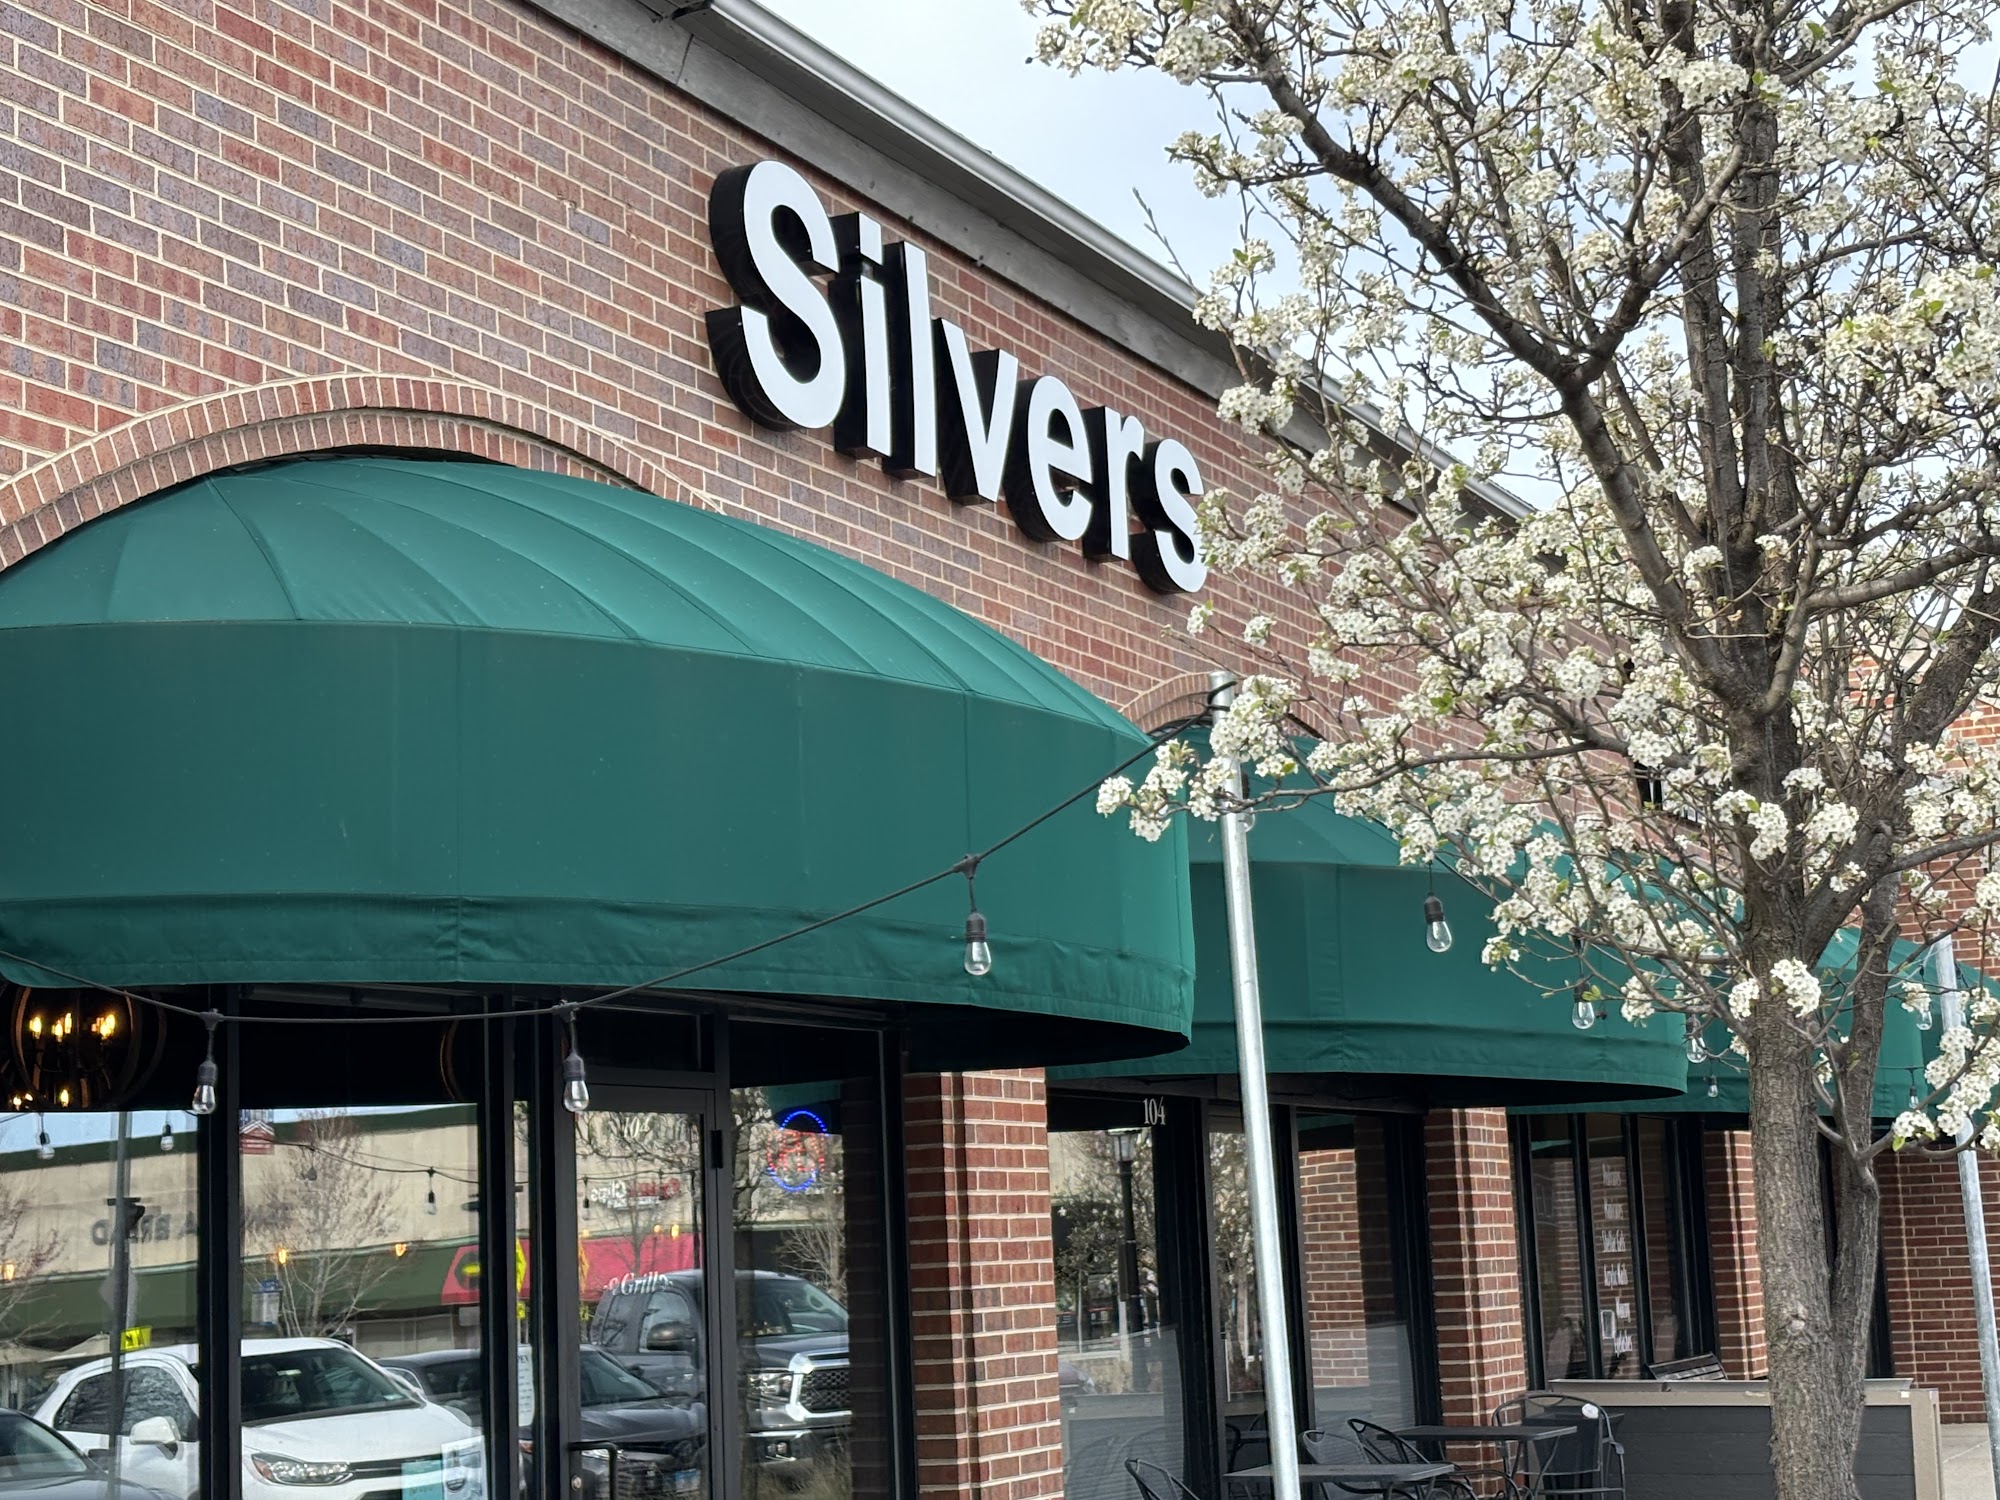 Silvers Grill